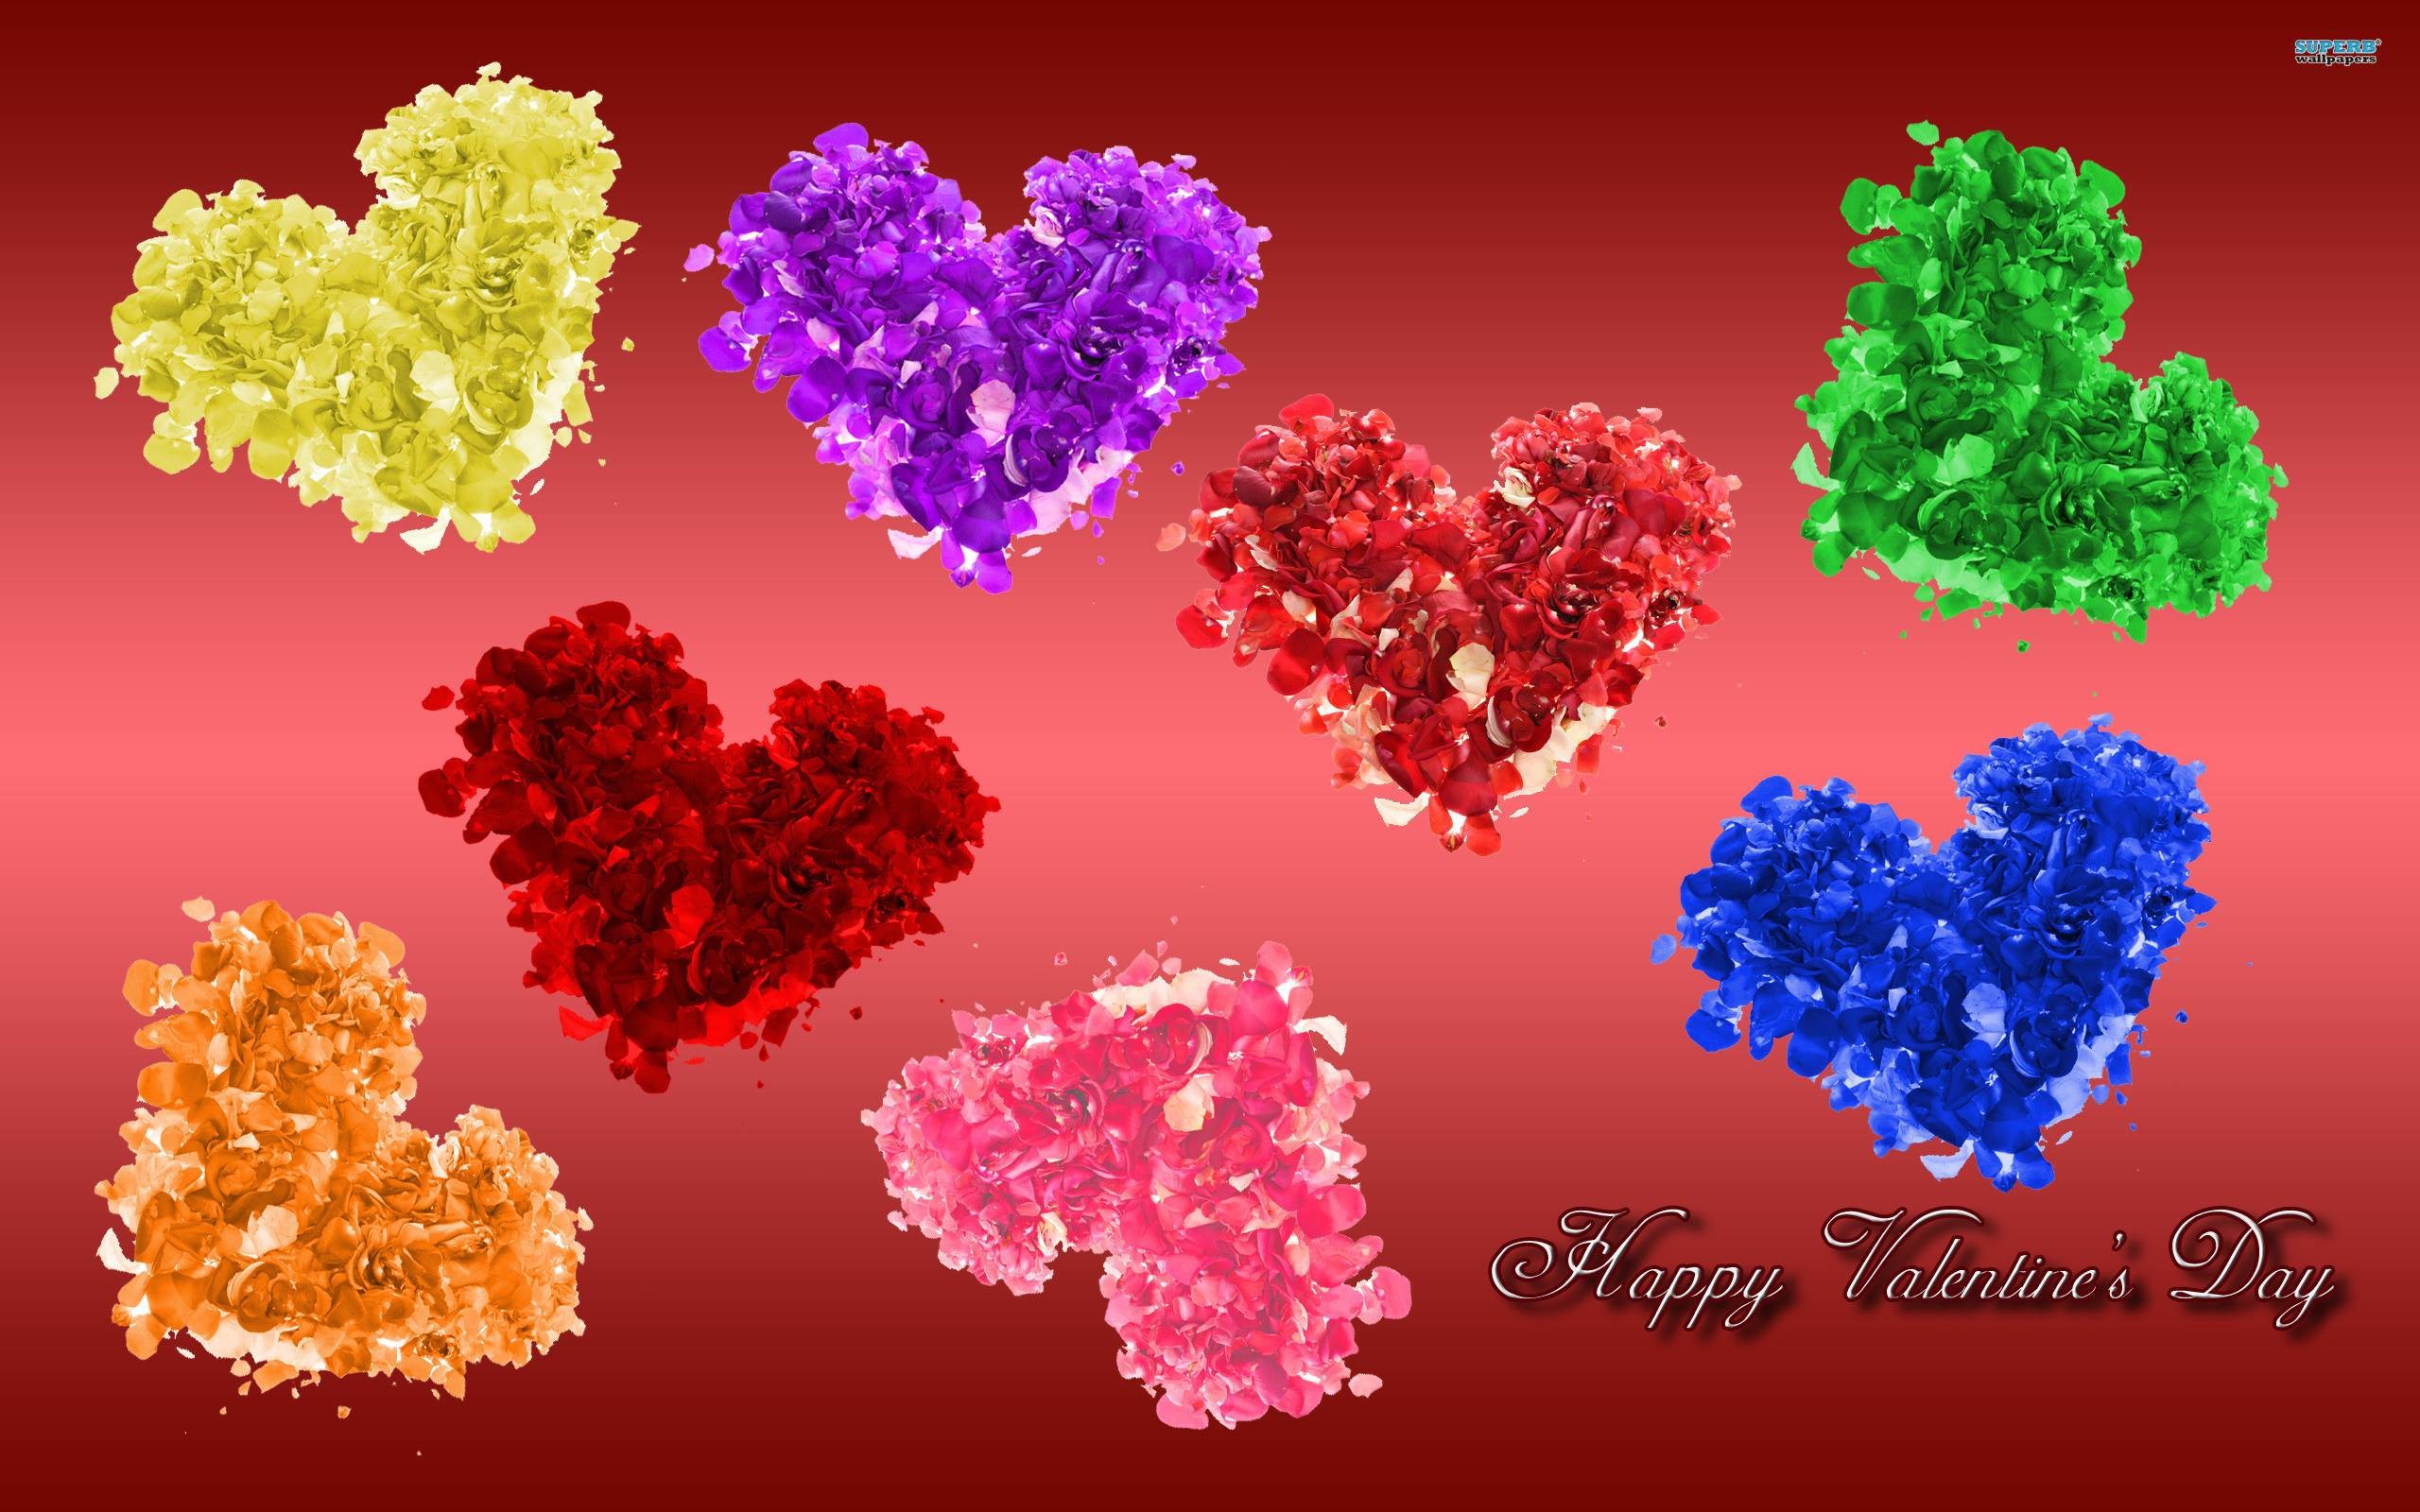 2560x1600 Valentine's Day wallpaper - Holiday wallpapers - #